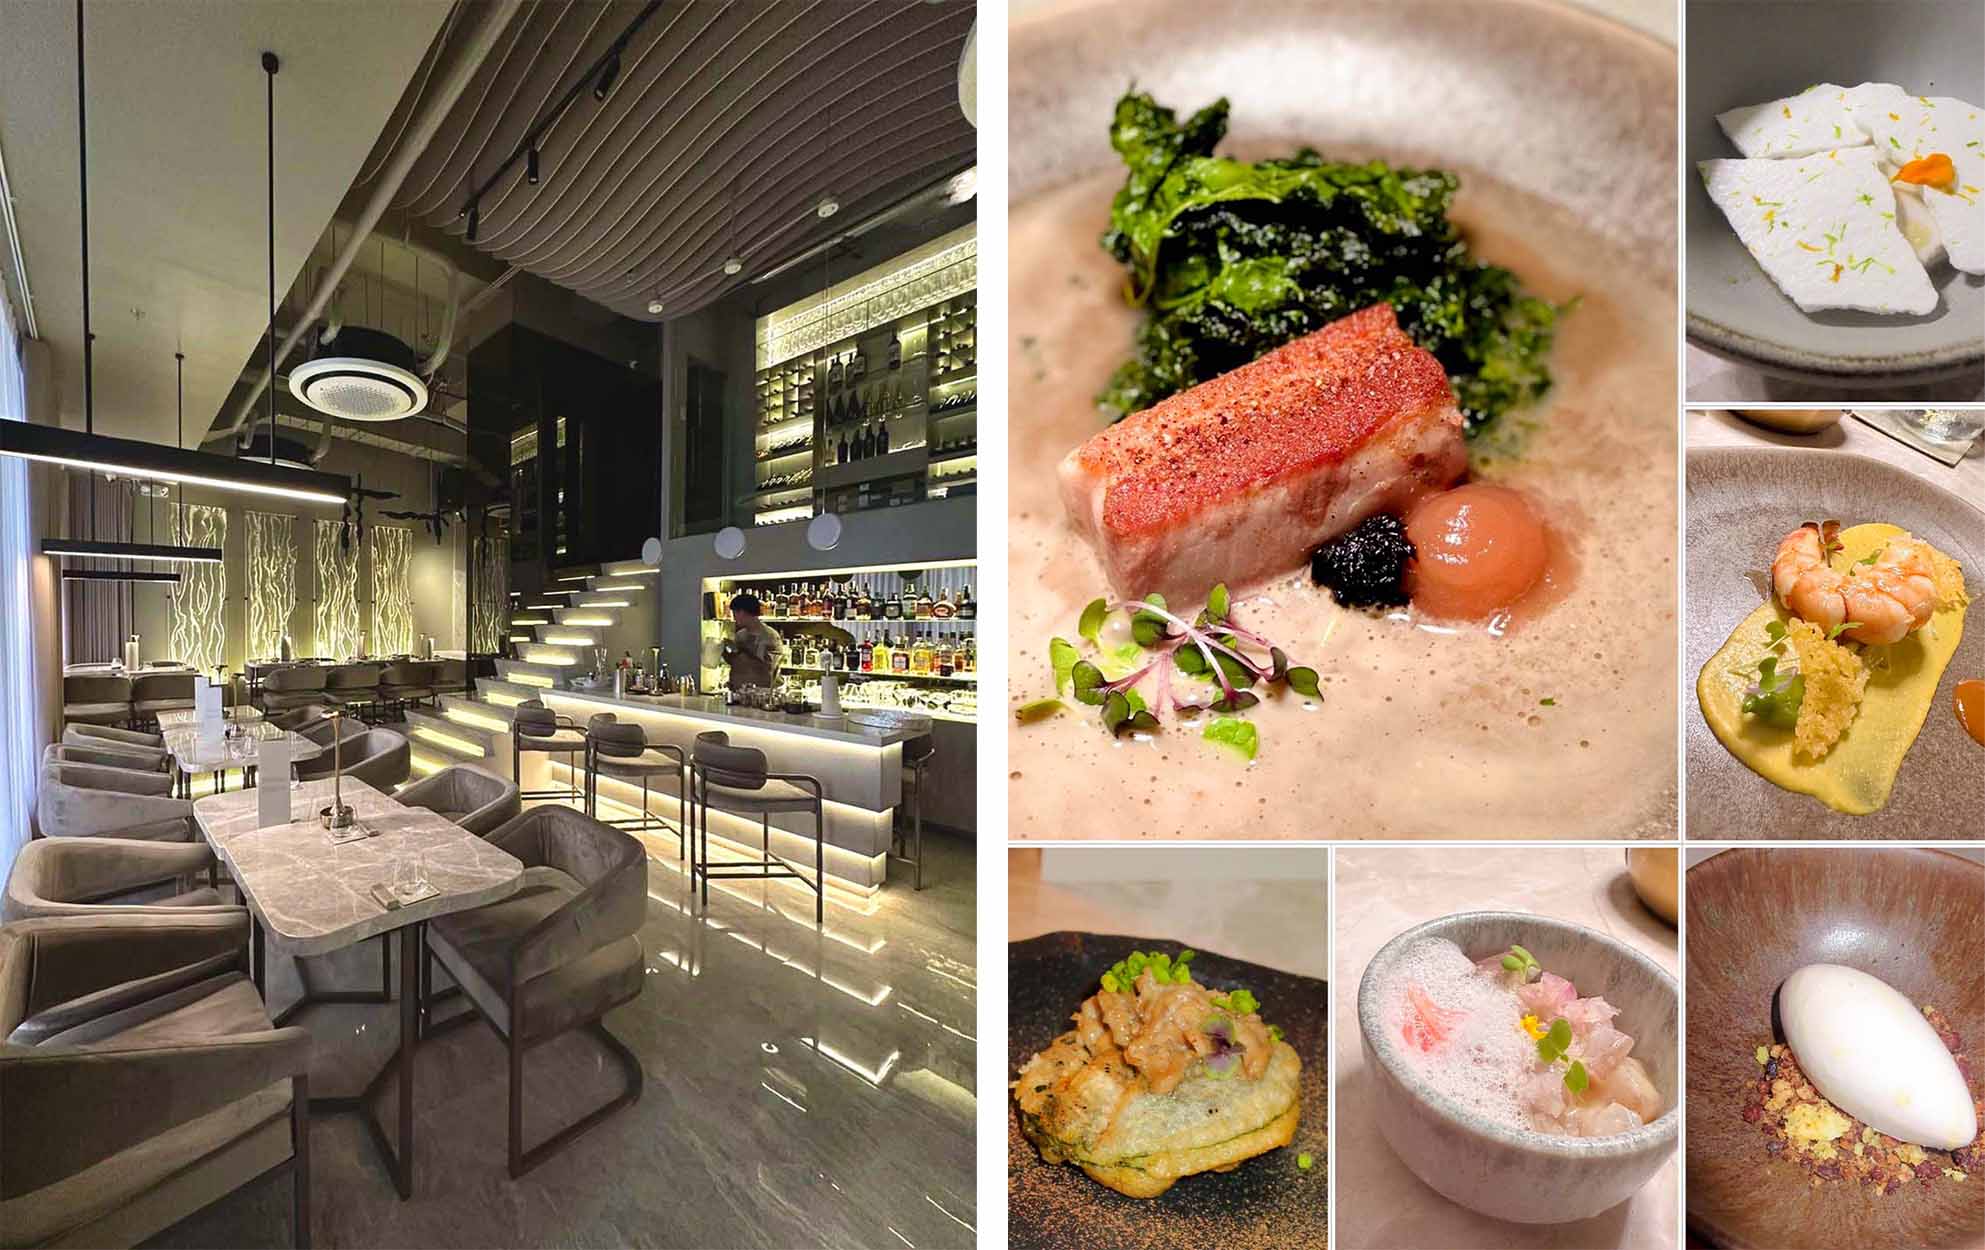 Clean, Elegant, and Modern—Taupe embodies sophistication and innovation. It offers a unique multisensory dining experience that should not be missed.